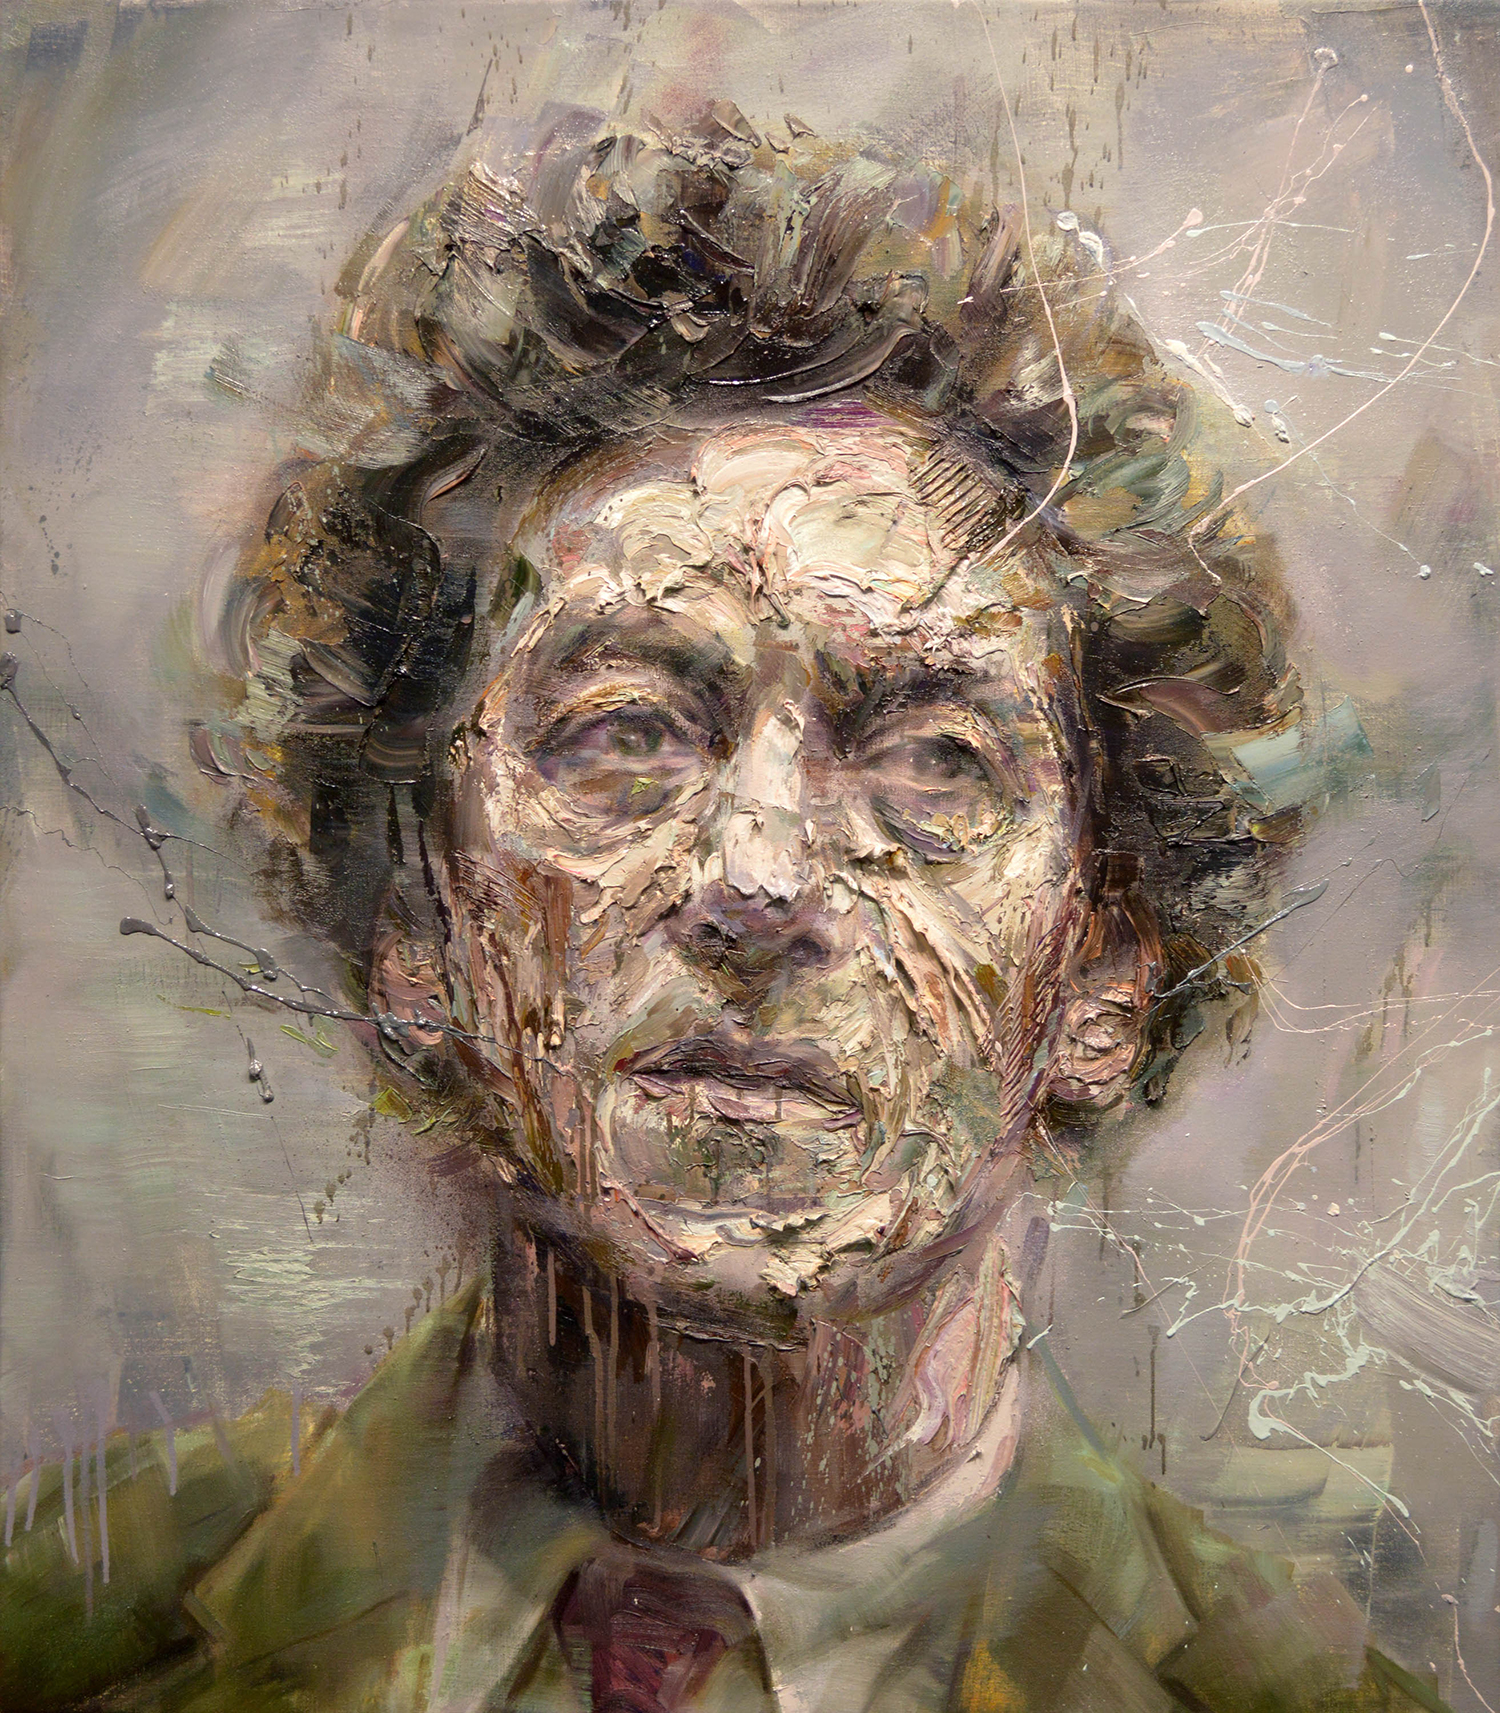 A portrait depicting the gaze of the ever relentless artist Alberto Giacometti